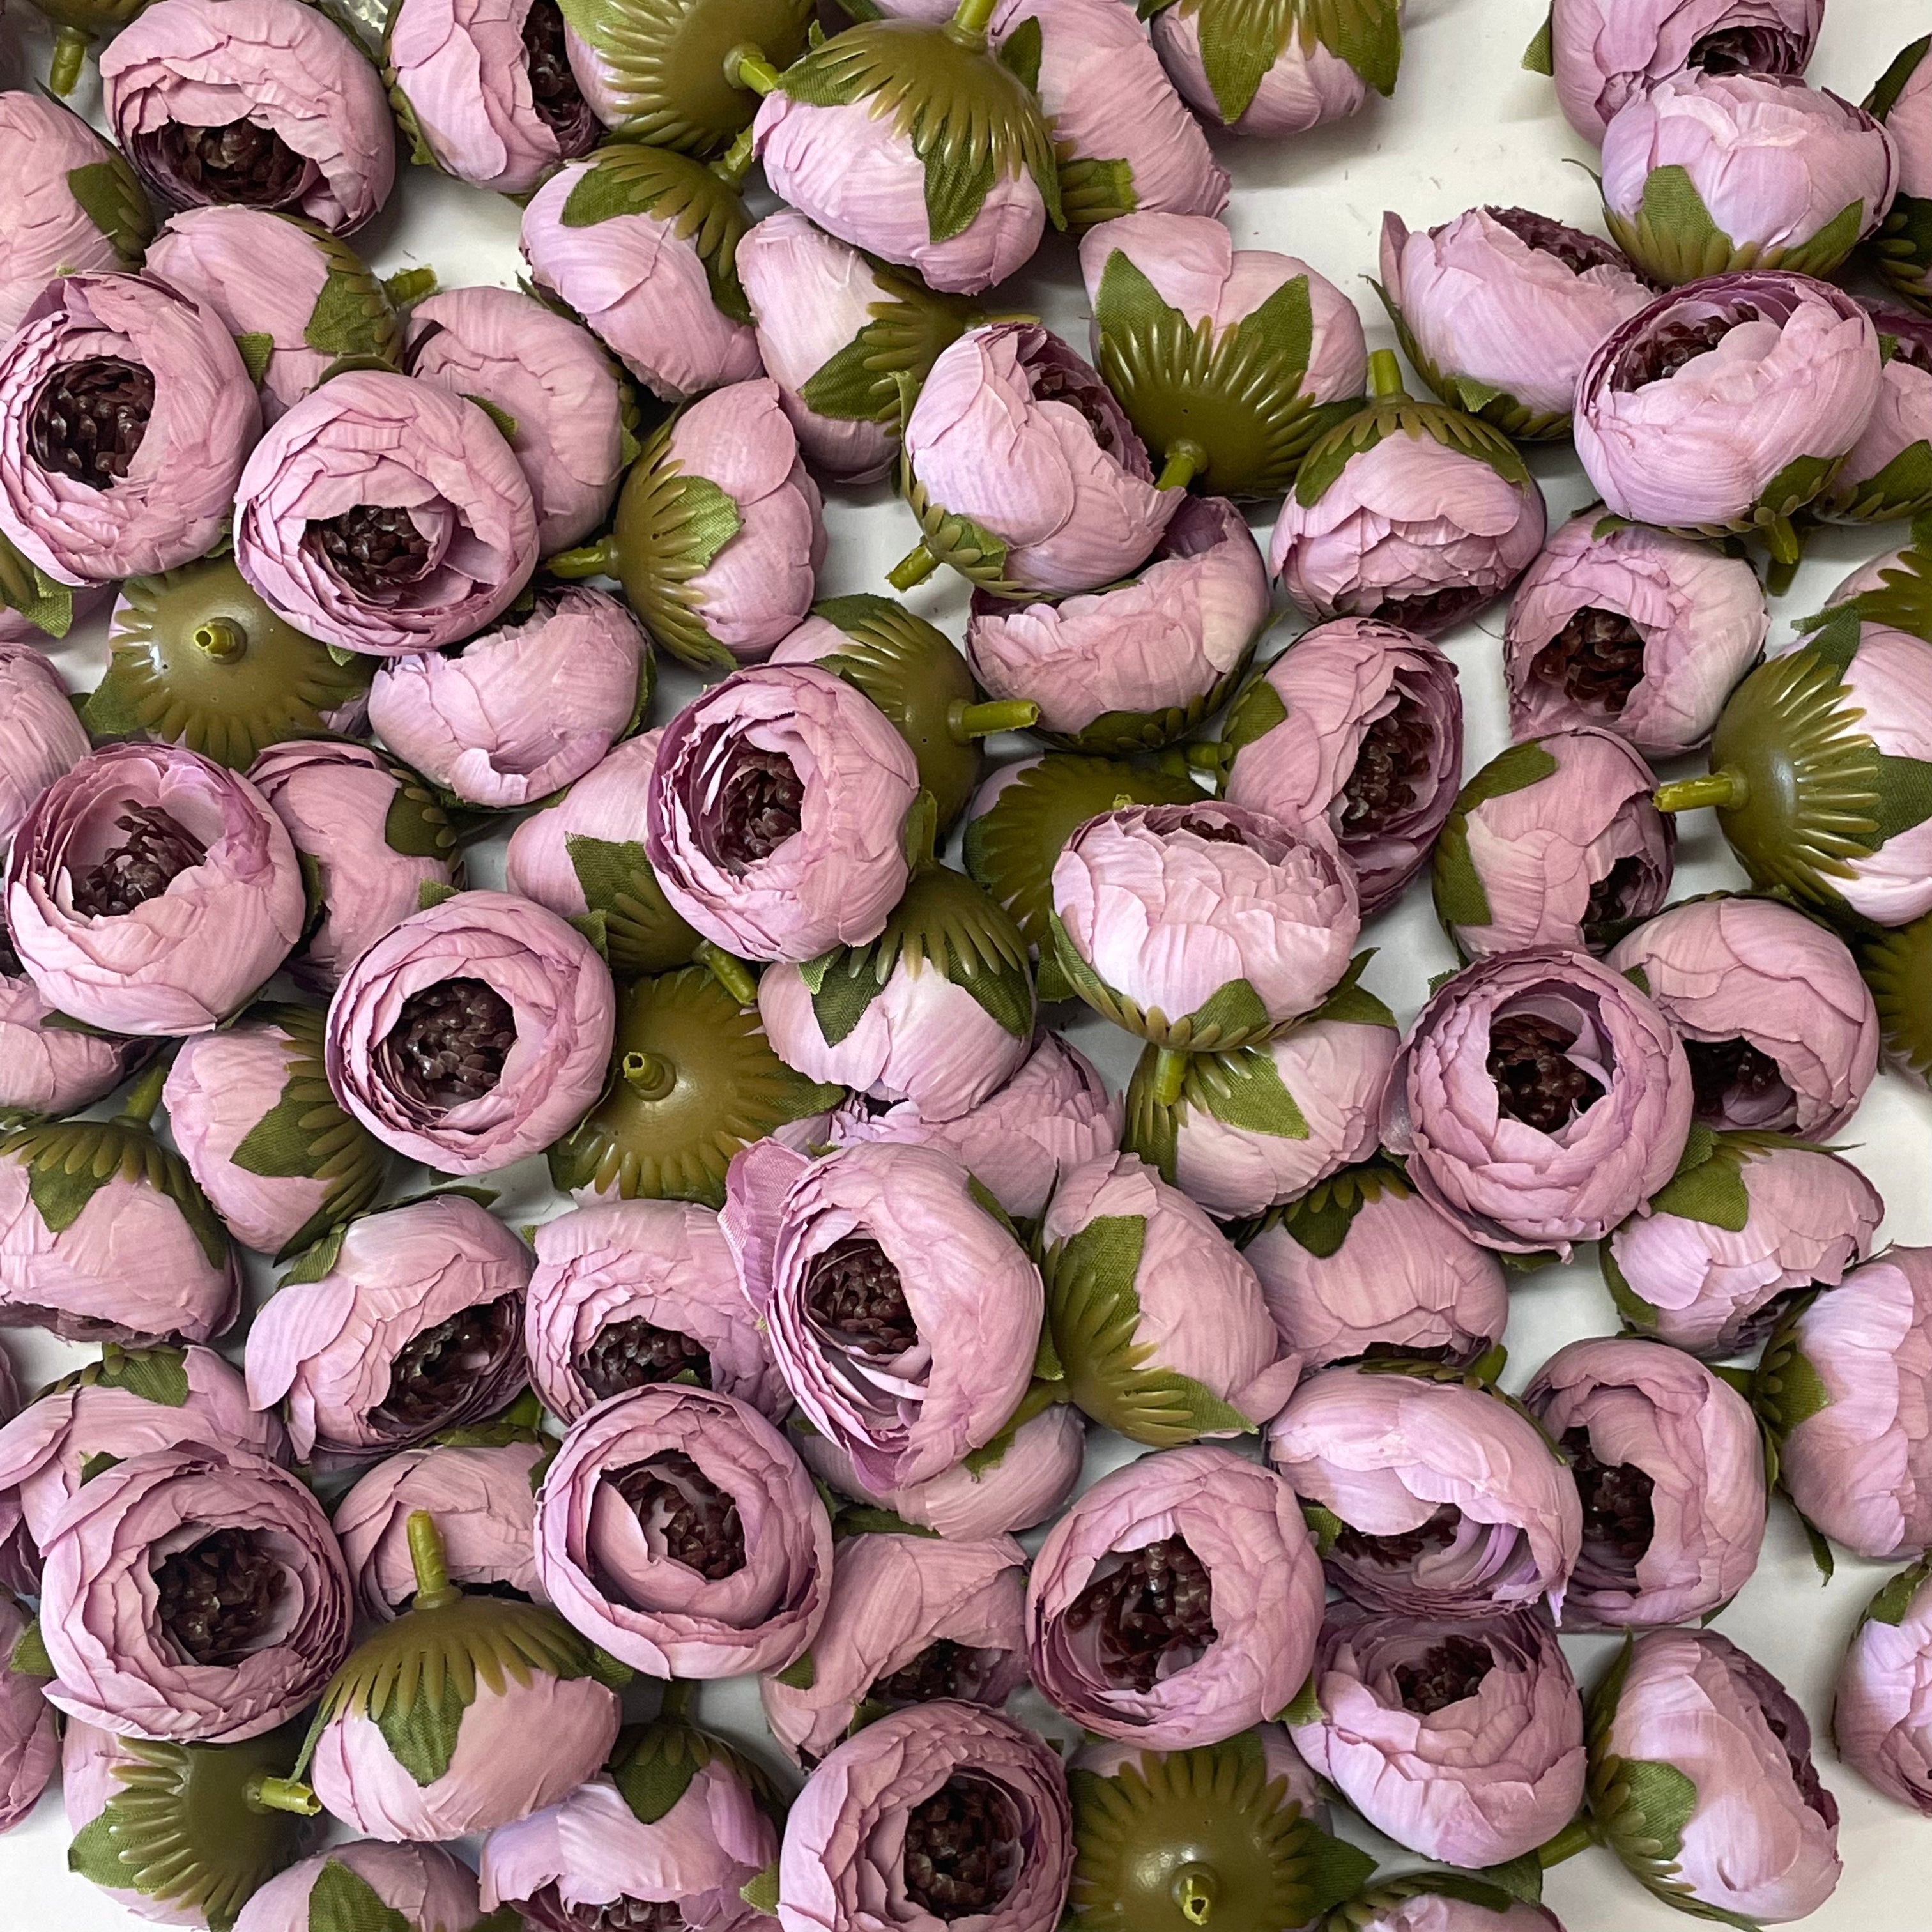 Artificial Silk Flower Heads - Dusty Mauve Rose Style 31  - 5 Pack